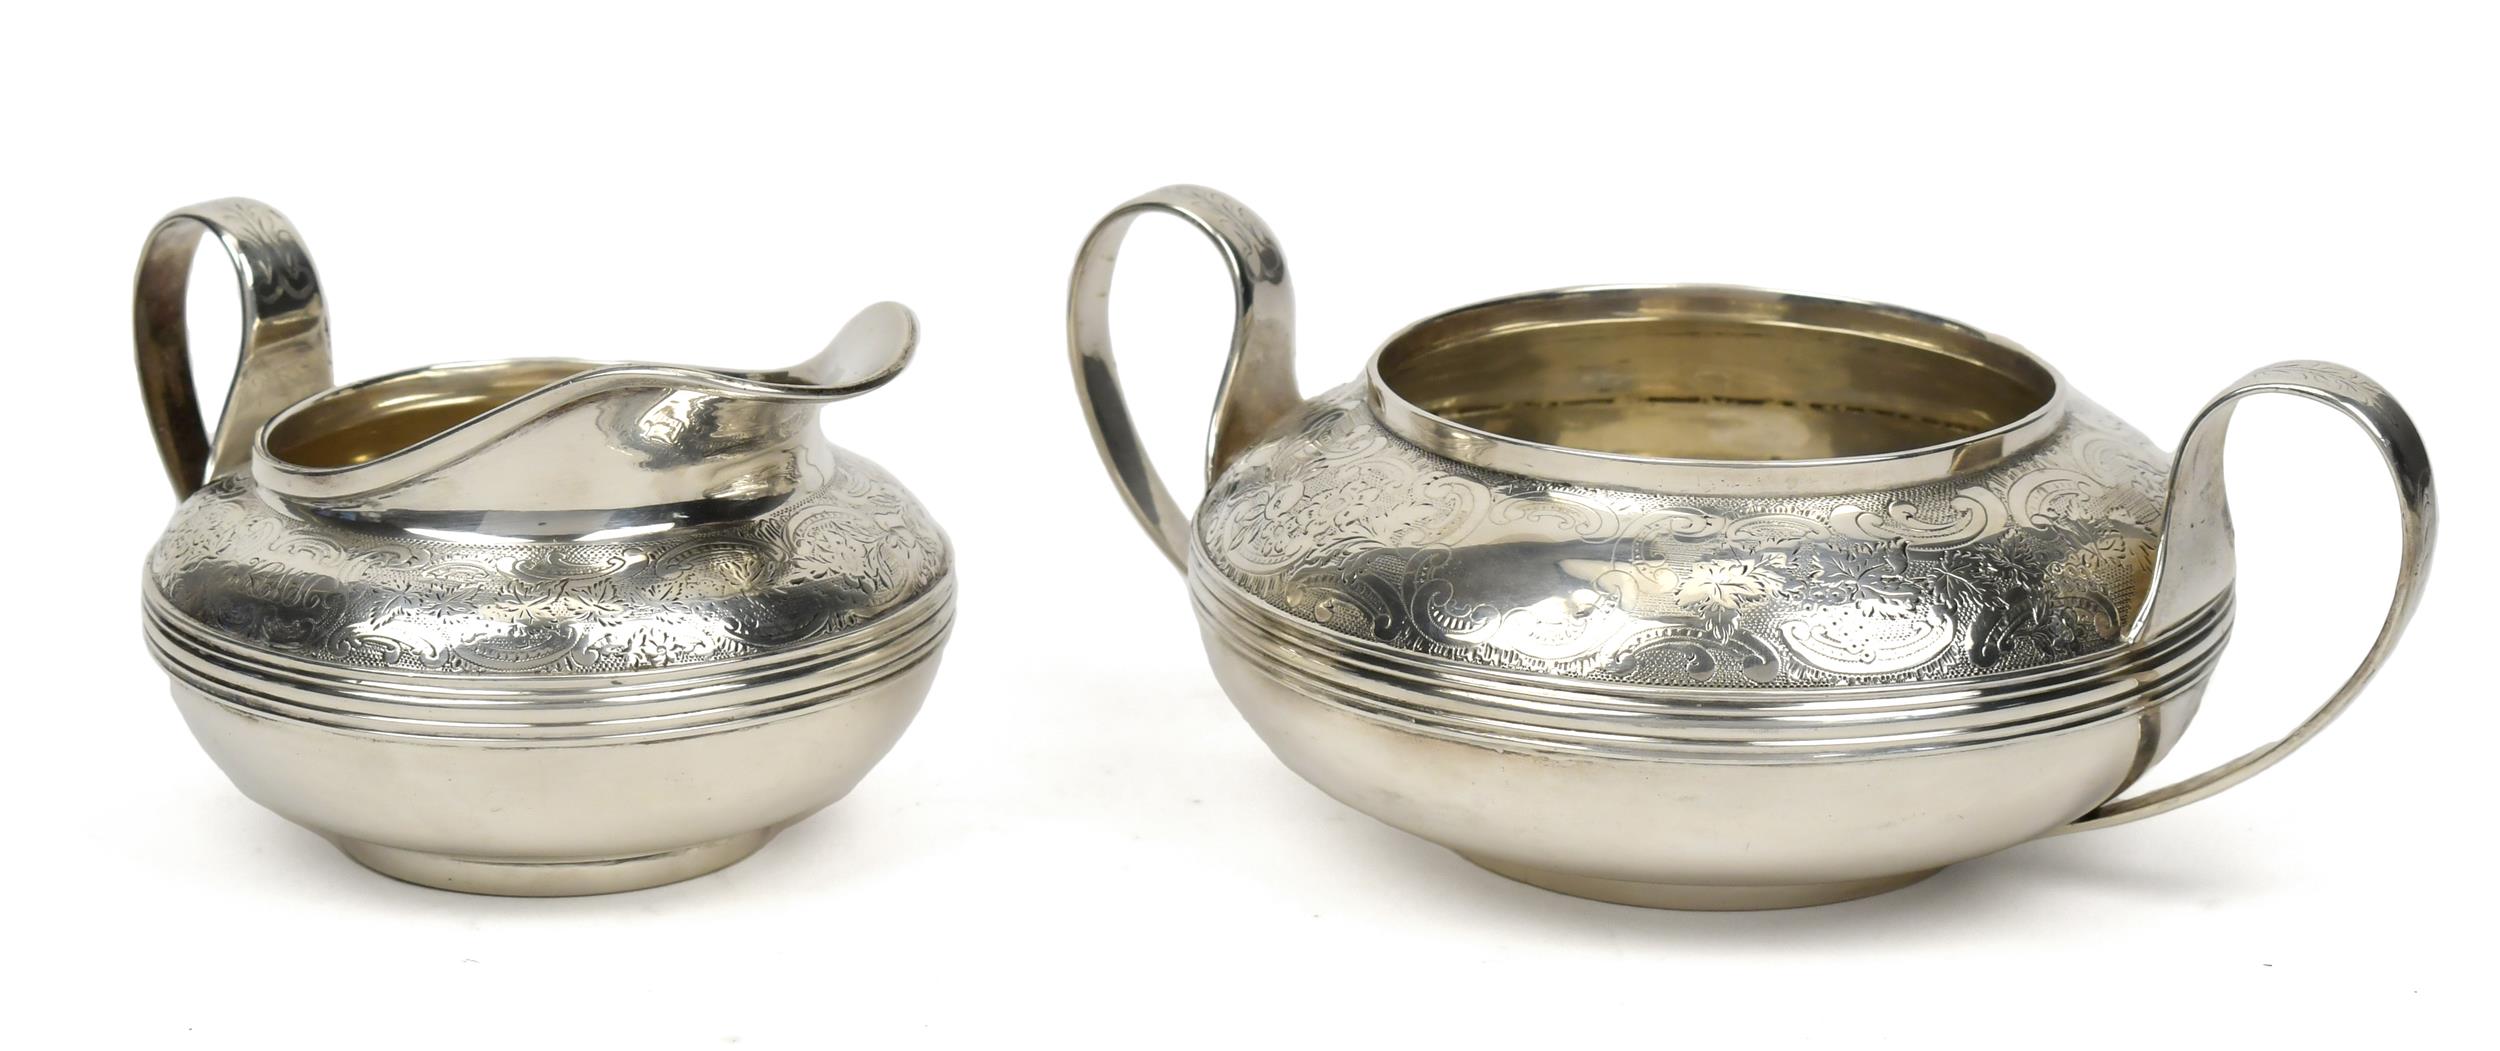 19TH C. EMES AND BARNARD STERLING